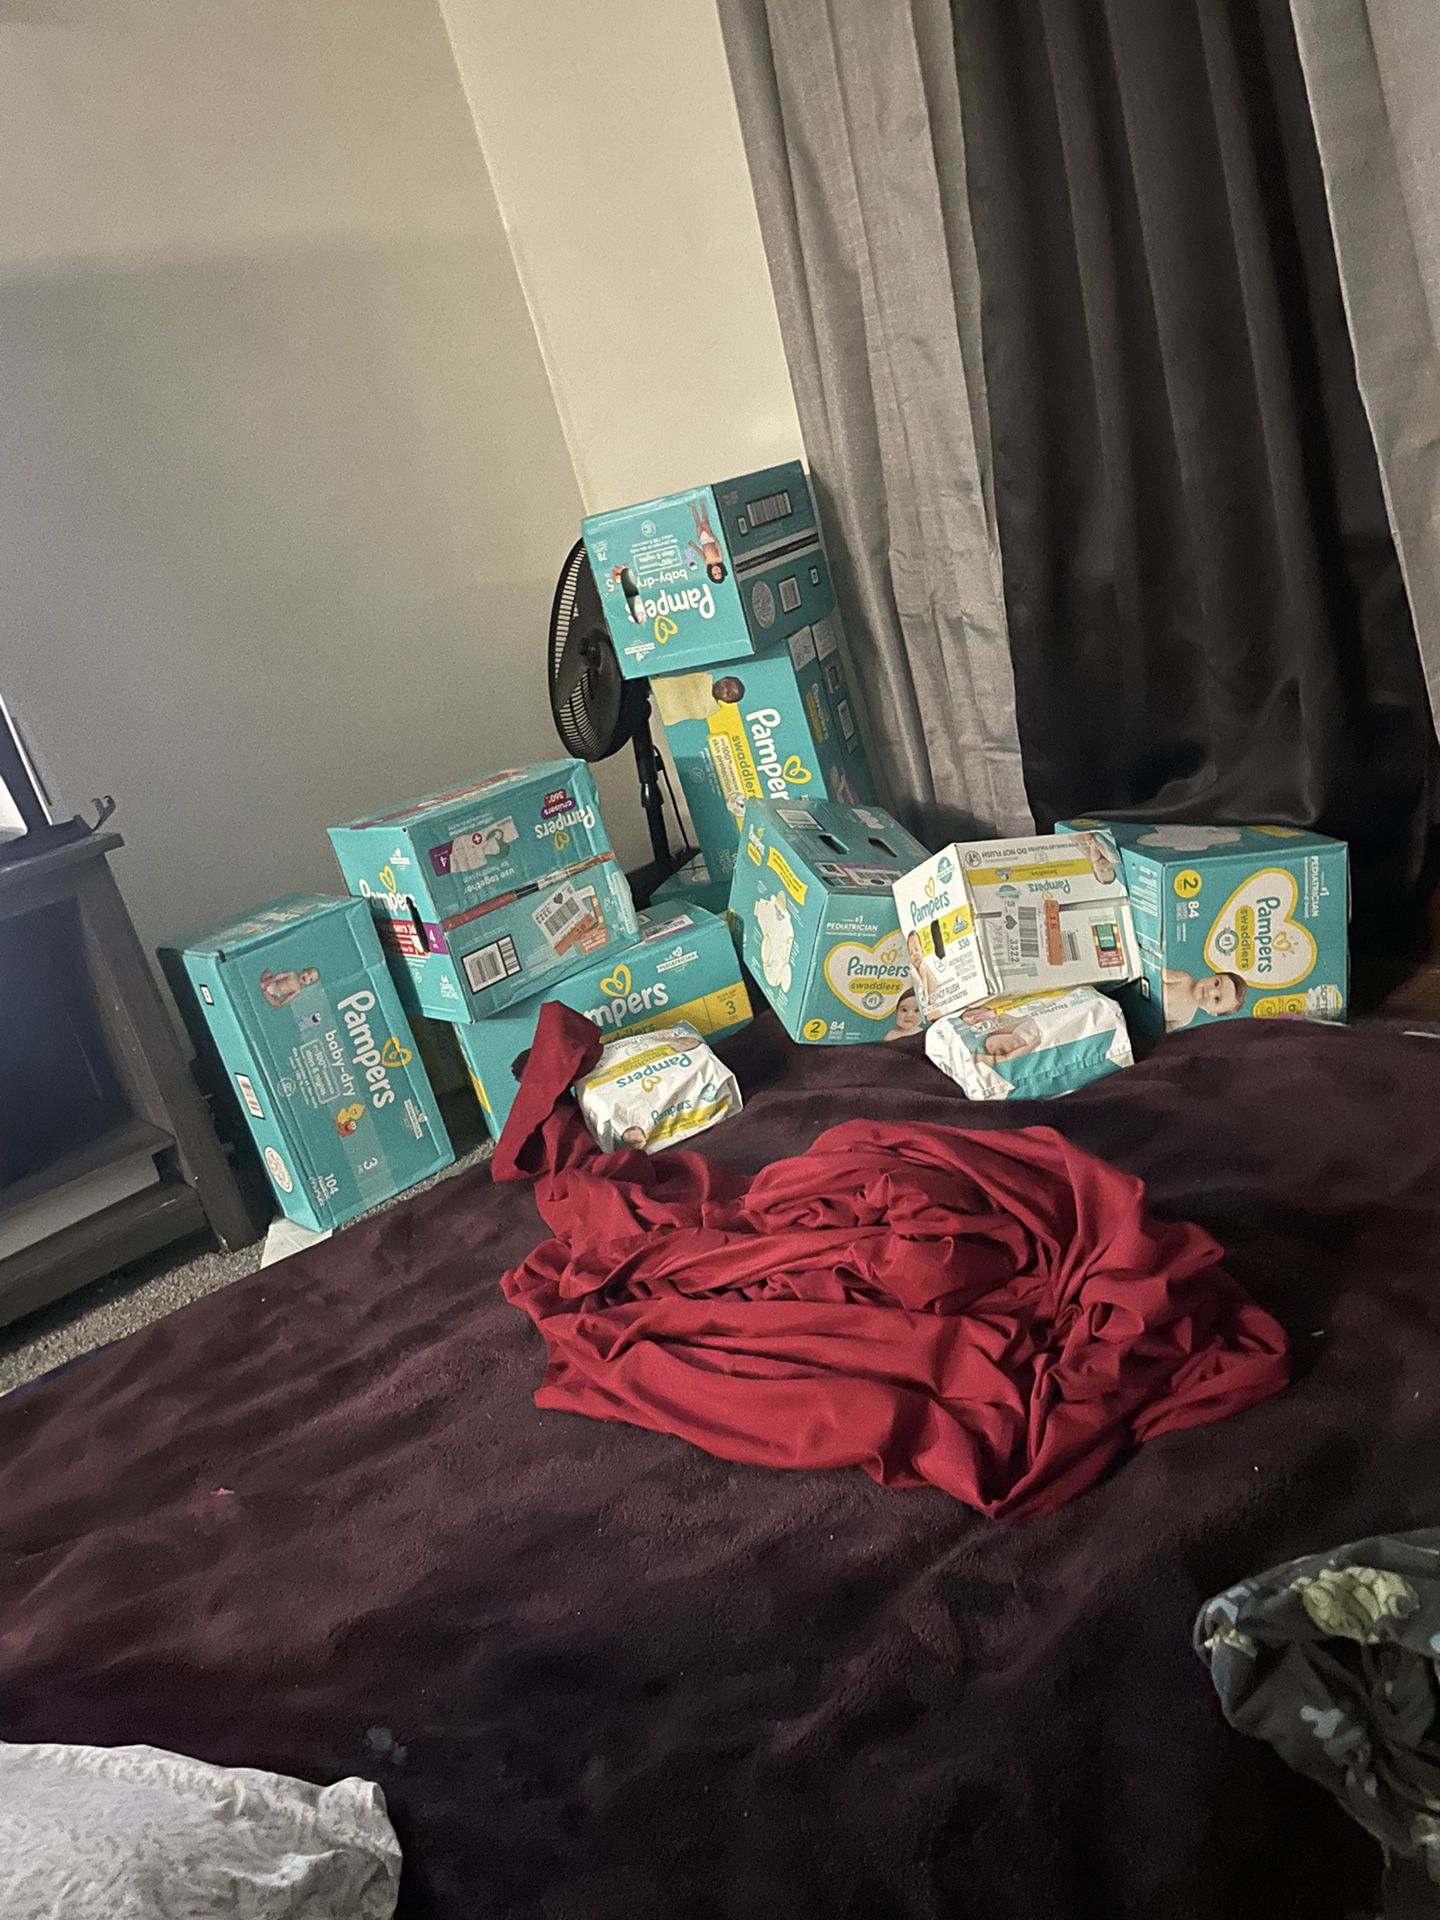 Pamper Brand Diapers and wipes